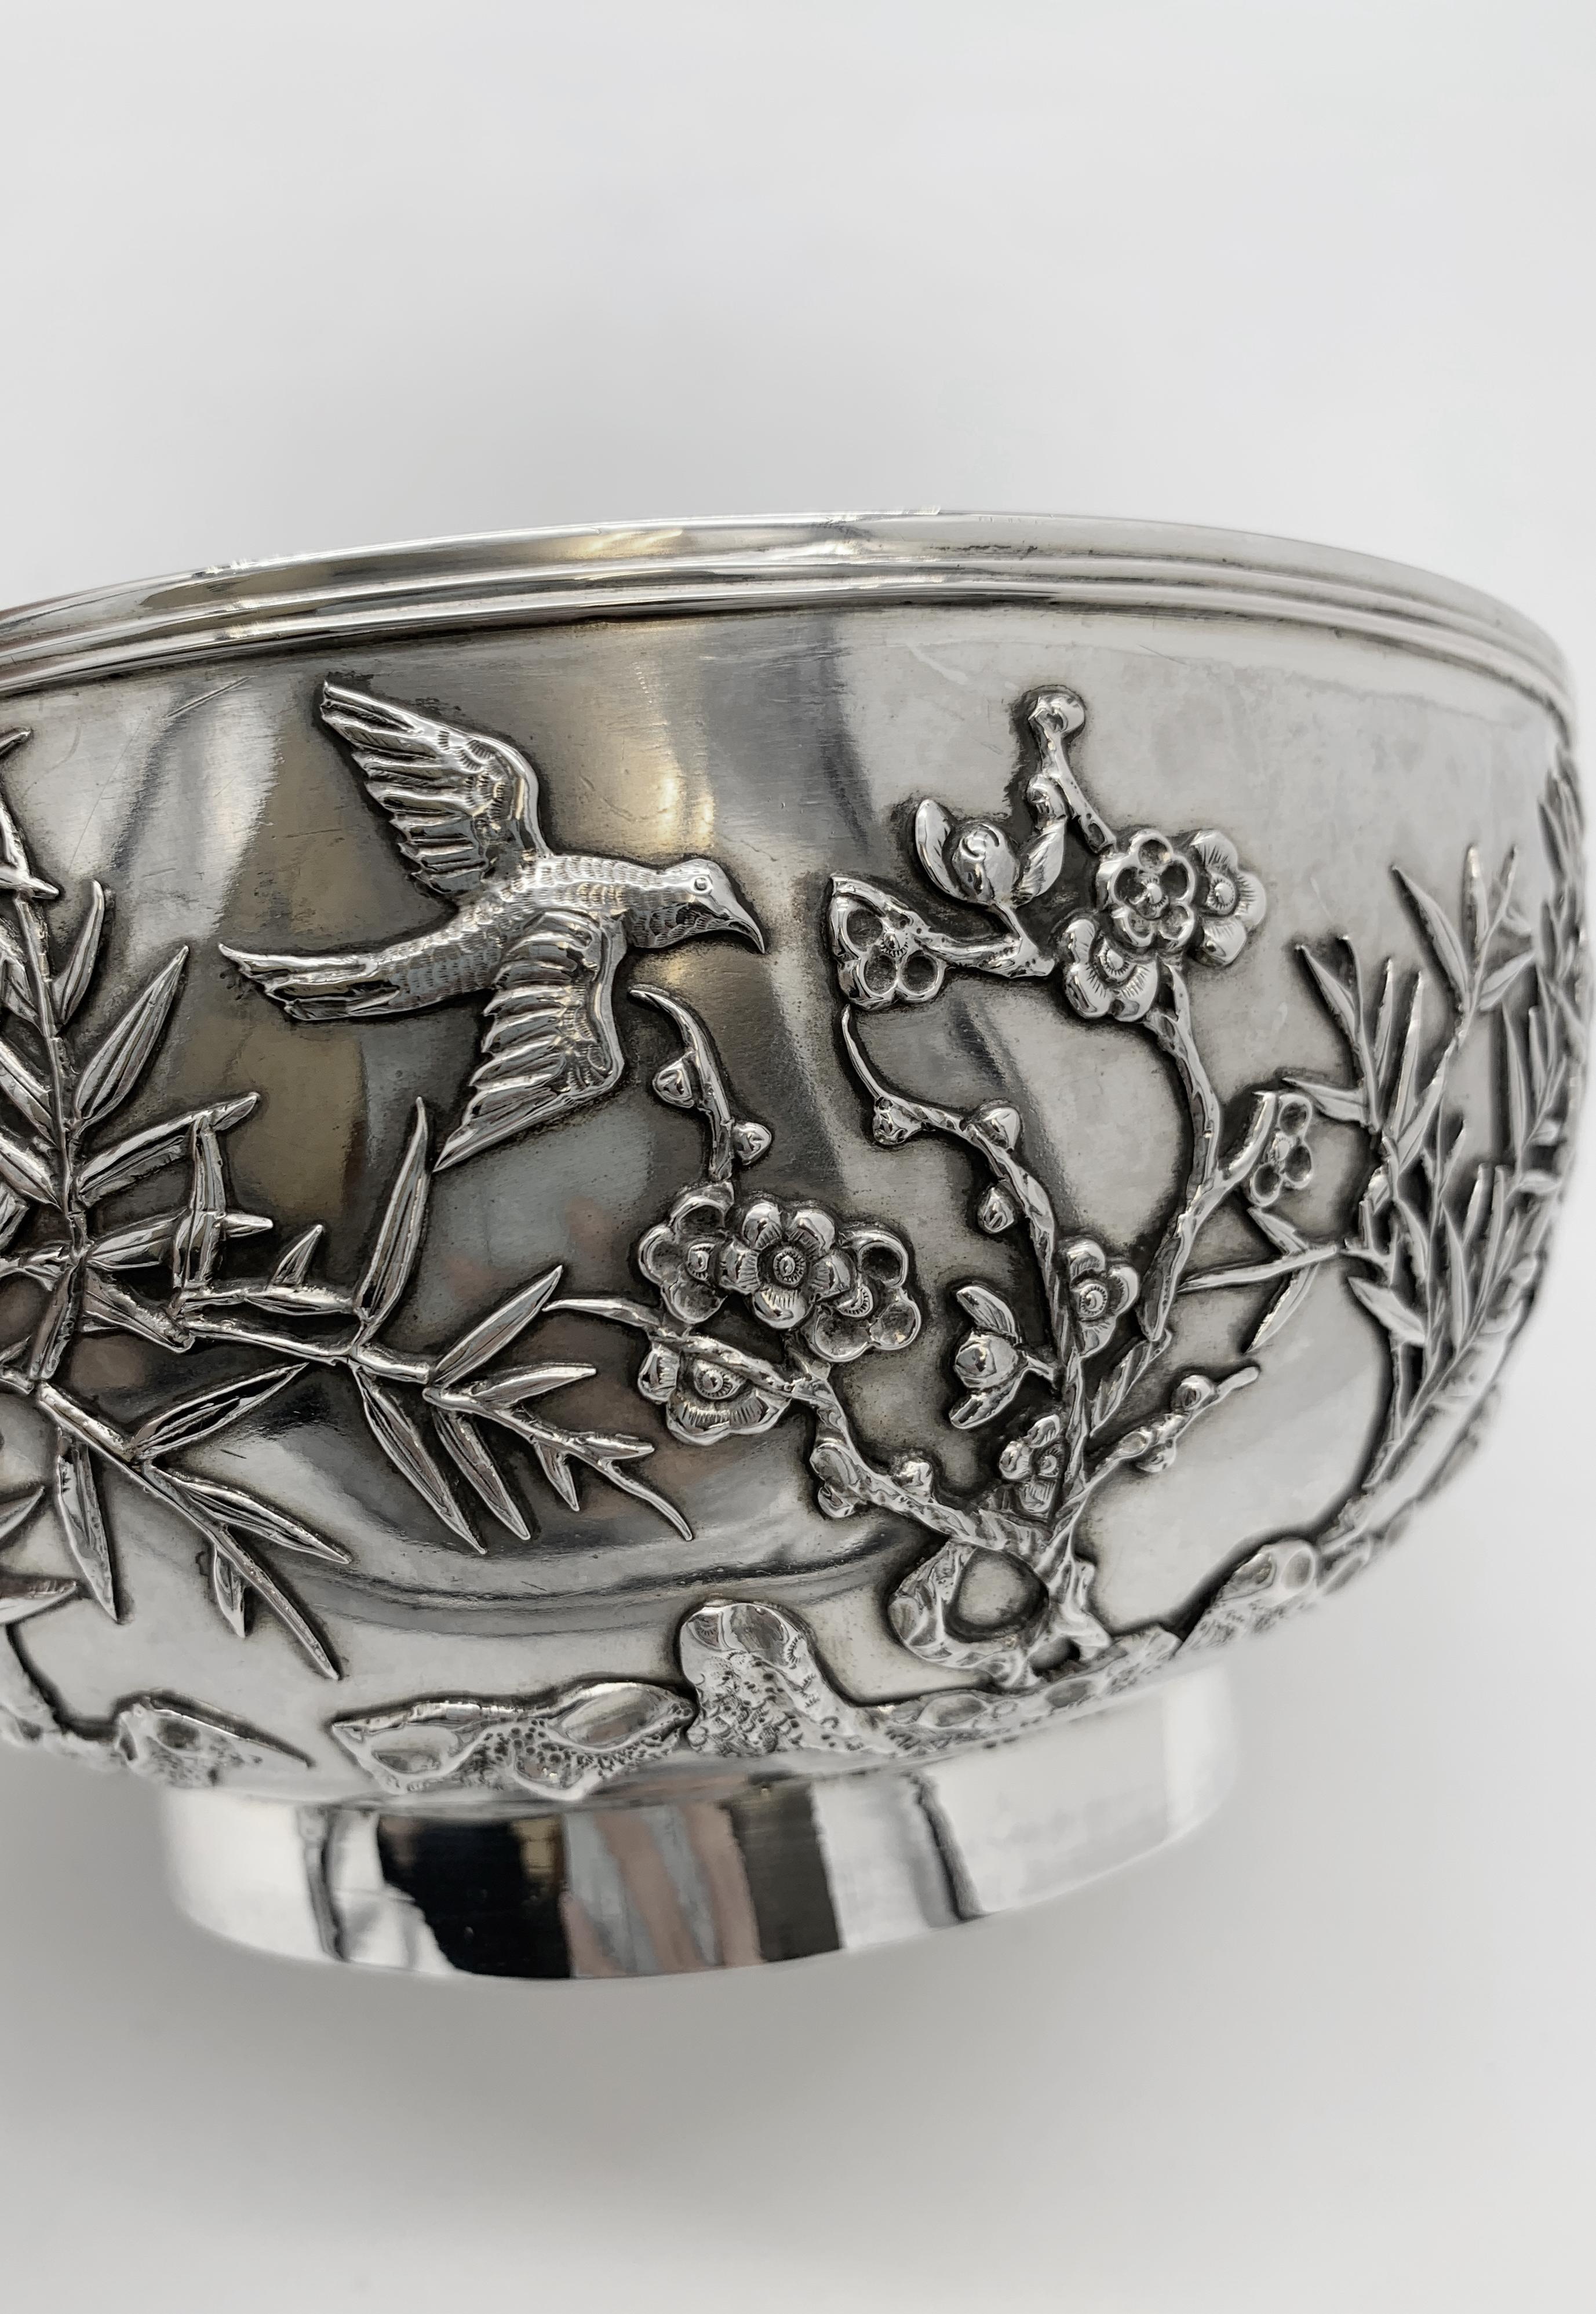 Chinese Export Silver Bowl, circa 1890, round and sitting on a plain collet foot. The bowl is applied with bamboo and prunus emerging from rocks, and also two birds in flight. The bowl is marked WH for the retailer Wang Hing; a 90 which is sometimes